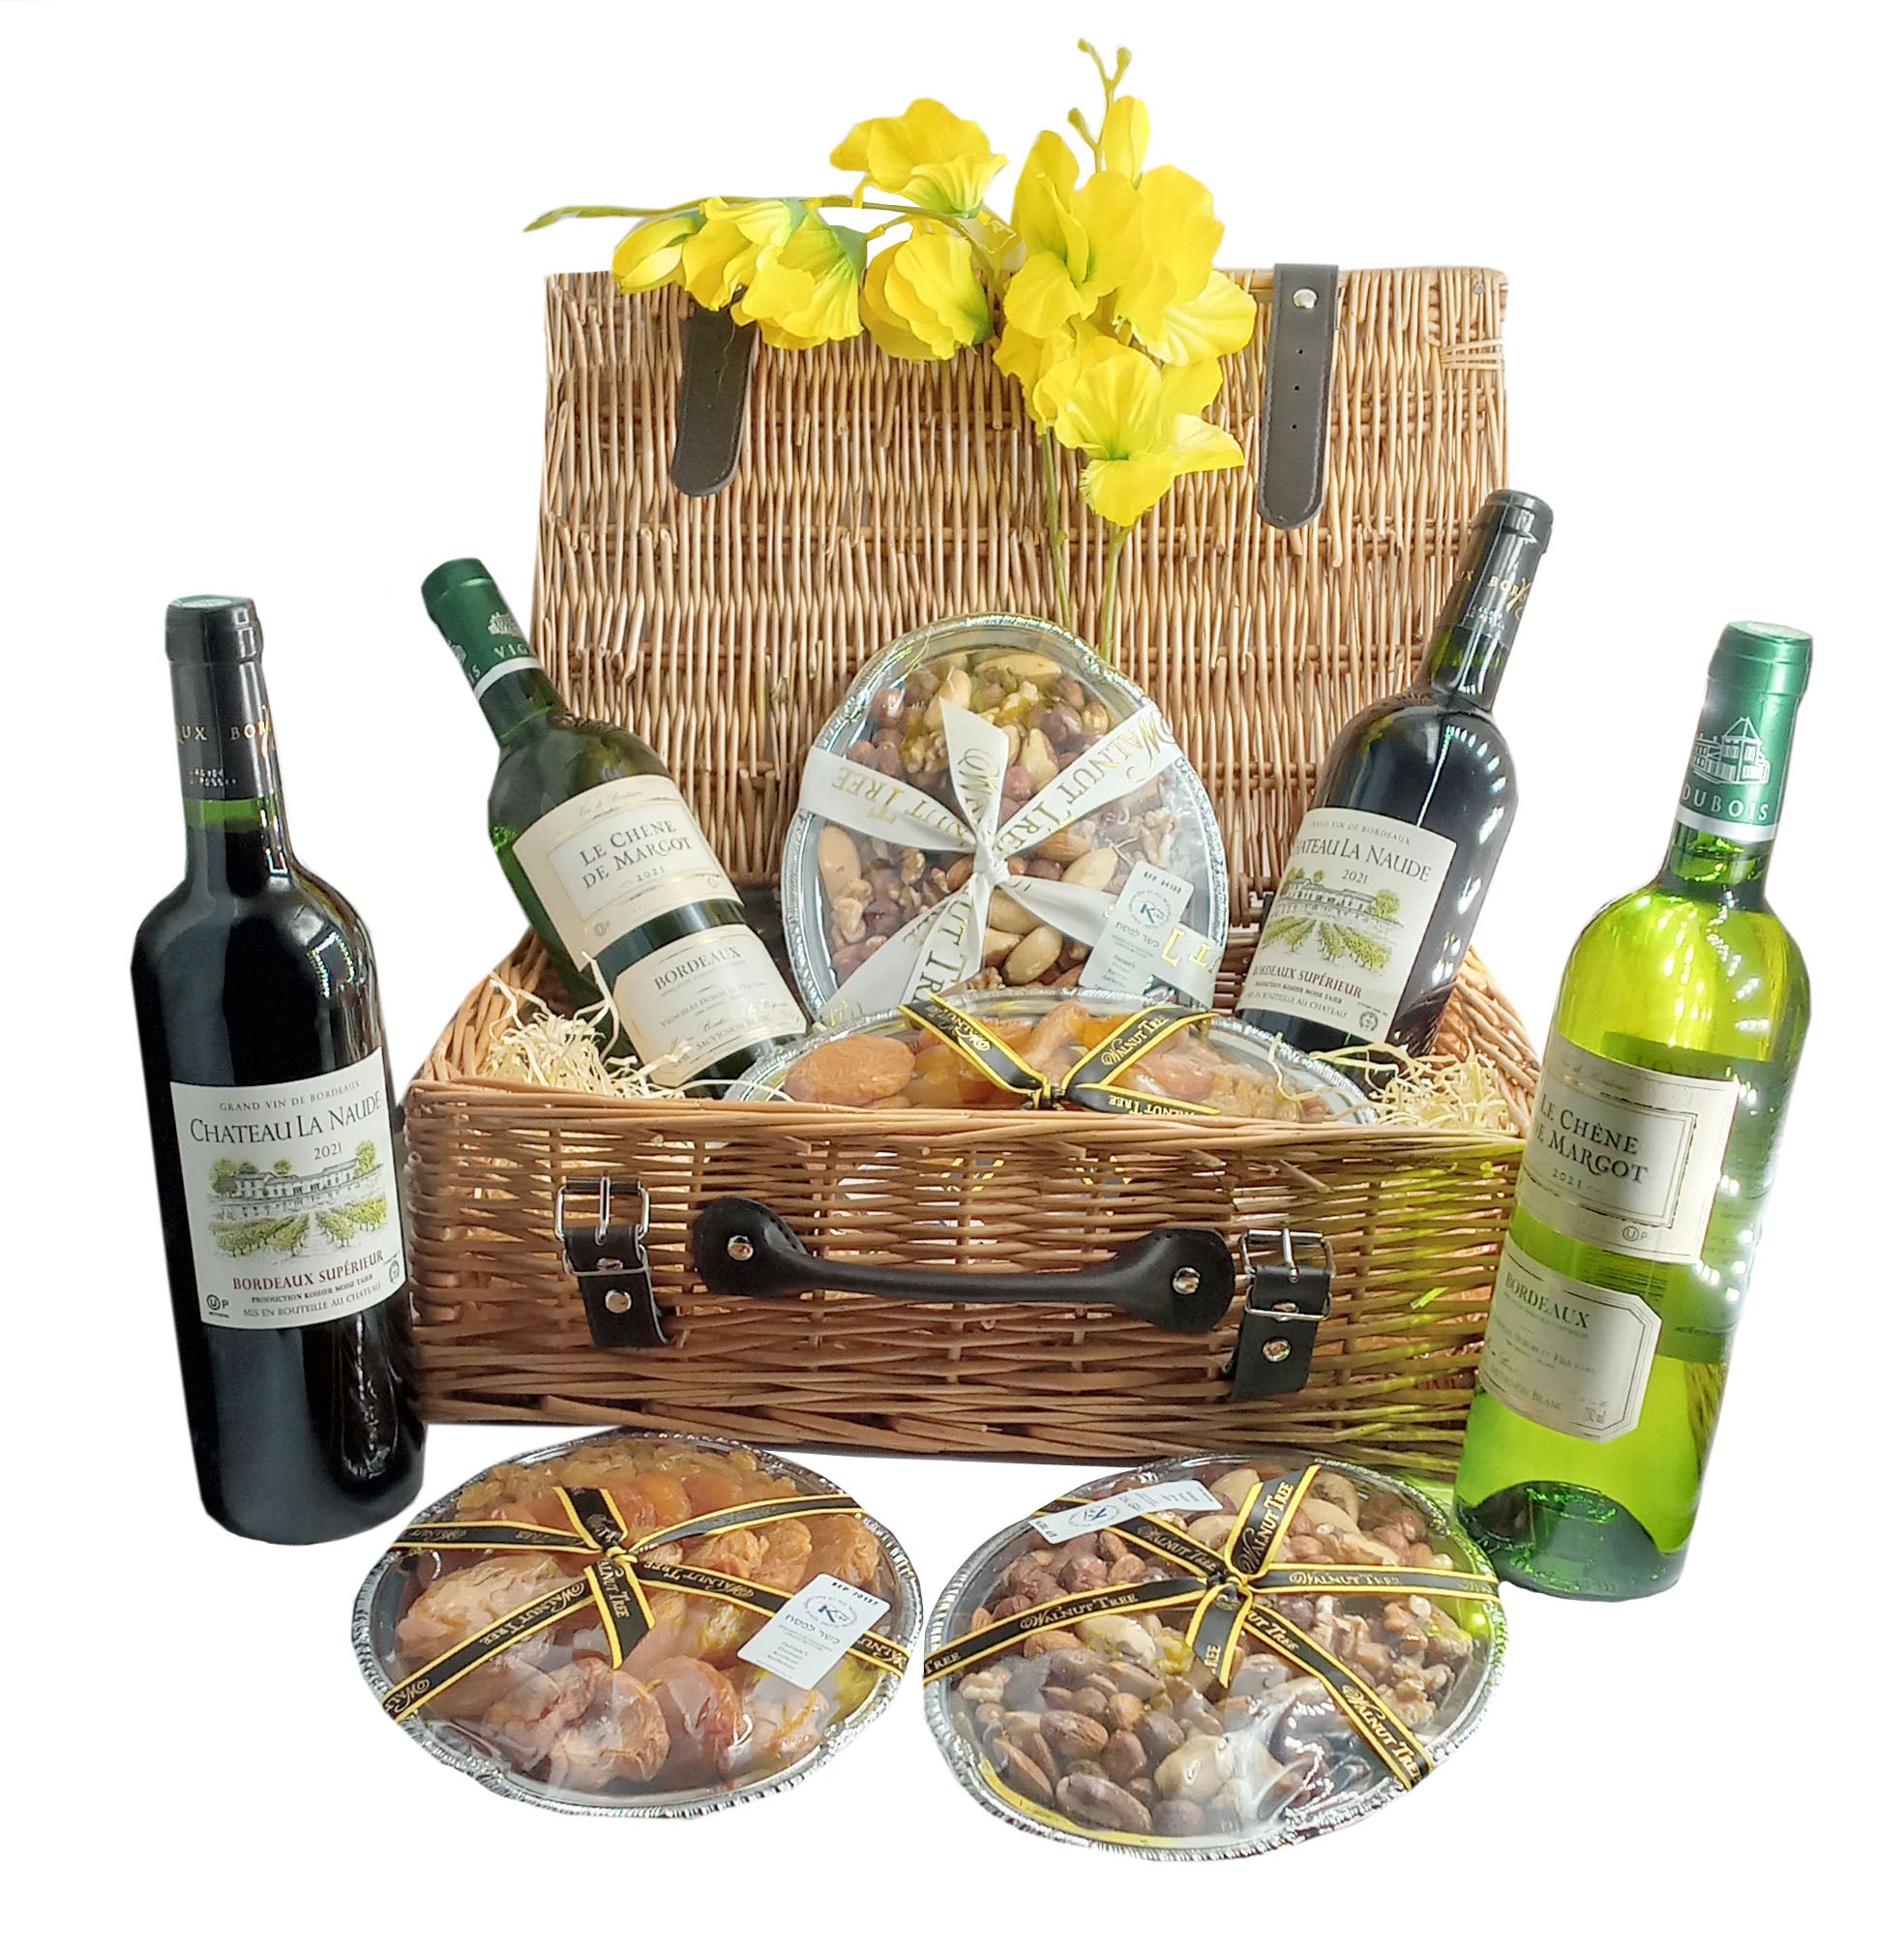 ROSH HASHANA KOSHER HAMPER & CORPORATE GIFTS. GLUTEN FREE & VEGAN HAMPER WITH FRENCH BORDEAUX AND SAUVIGNON WINE, ASSORTED NUTS AND DRIED FRUITS PLATTER WITH A FLOWER OF YOUR CHOICE. GIFT WRAPPED WITH RIBBONS AND BOW. DELIVERED TO LONDON AND THE UK